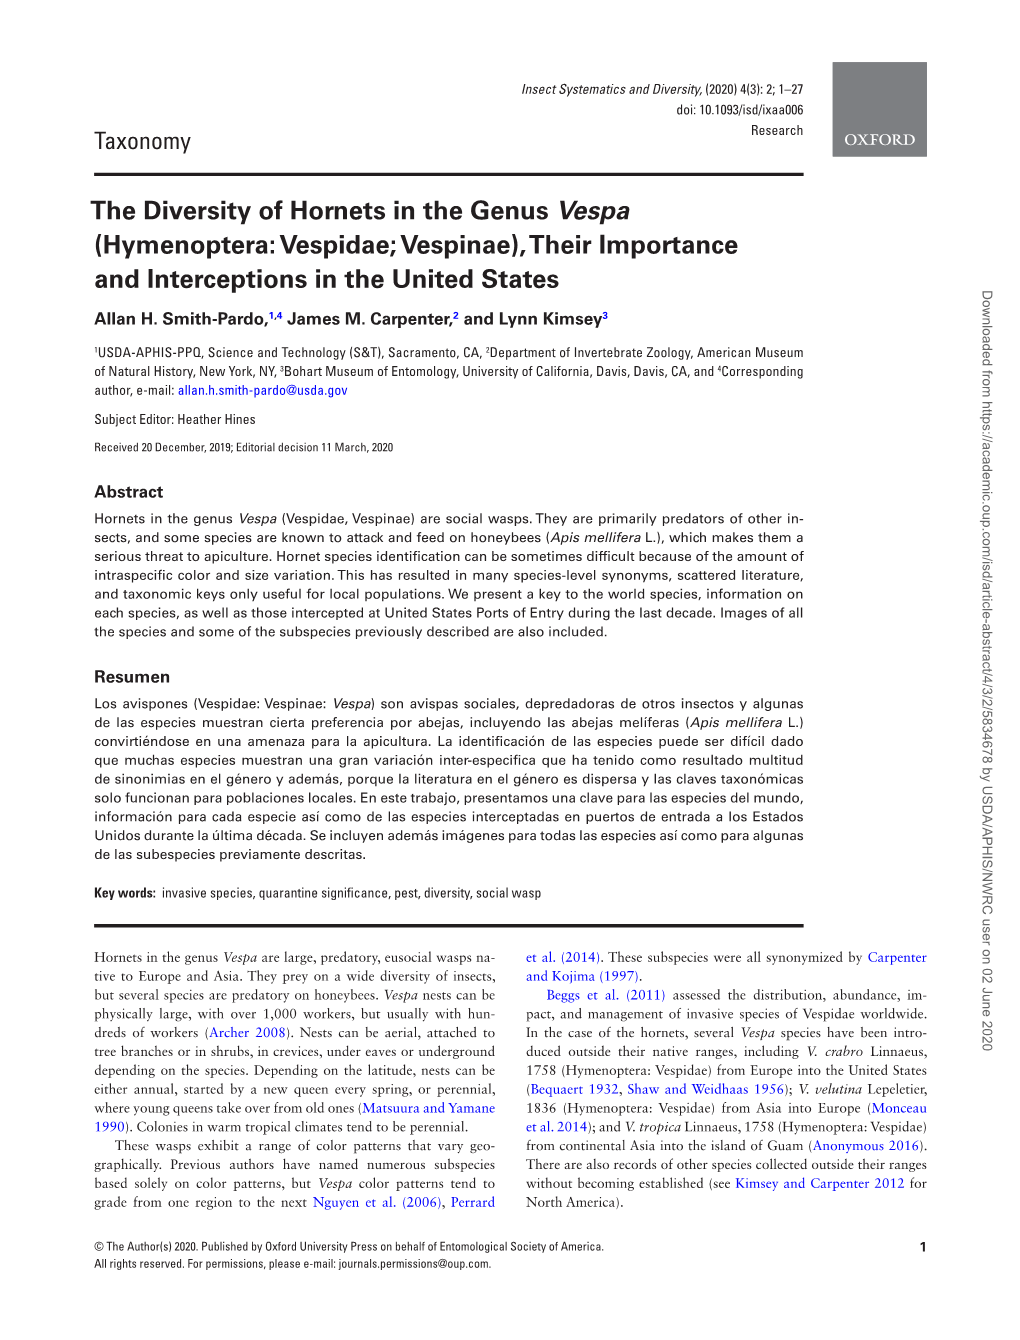 The Diversity of Hornets in the Genus Vespa (Hymenoptera: Vespidae; Vespinae), Their Importance